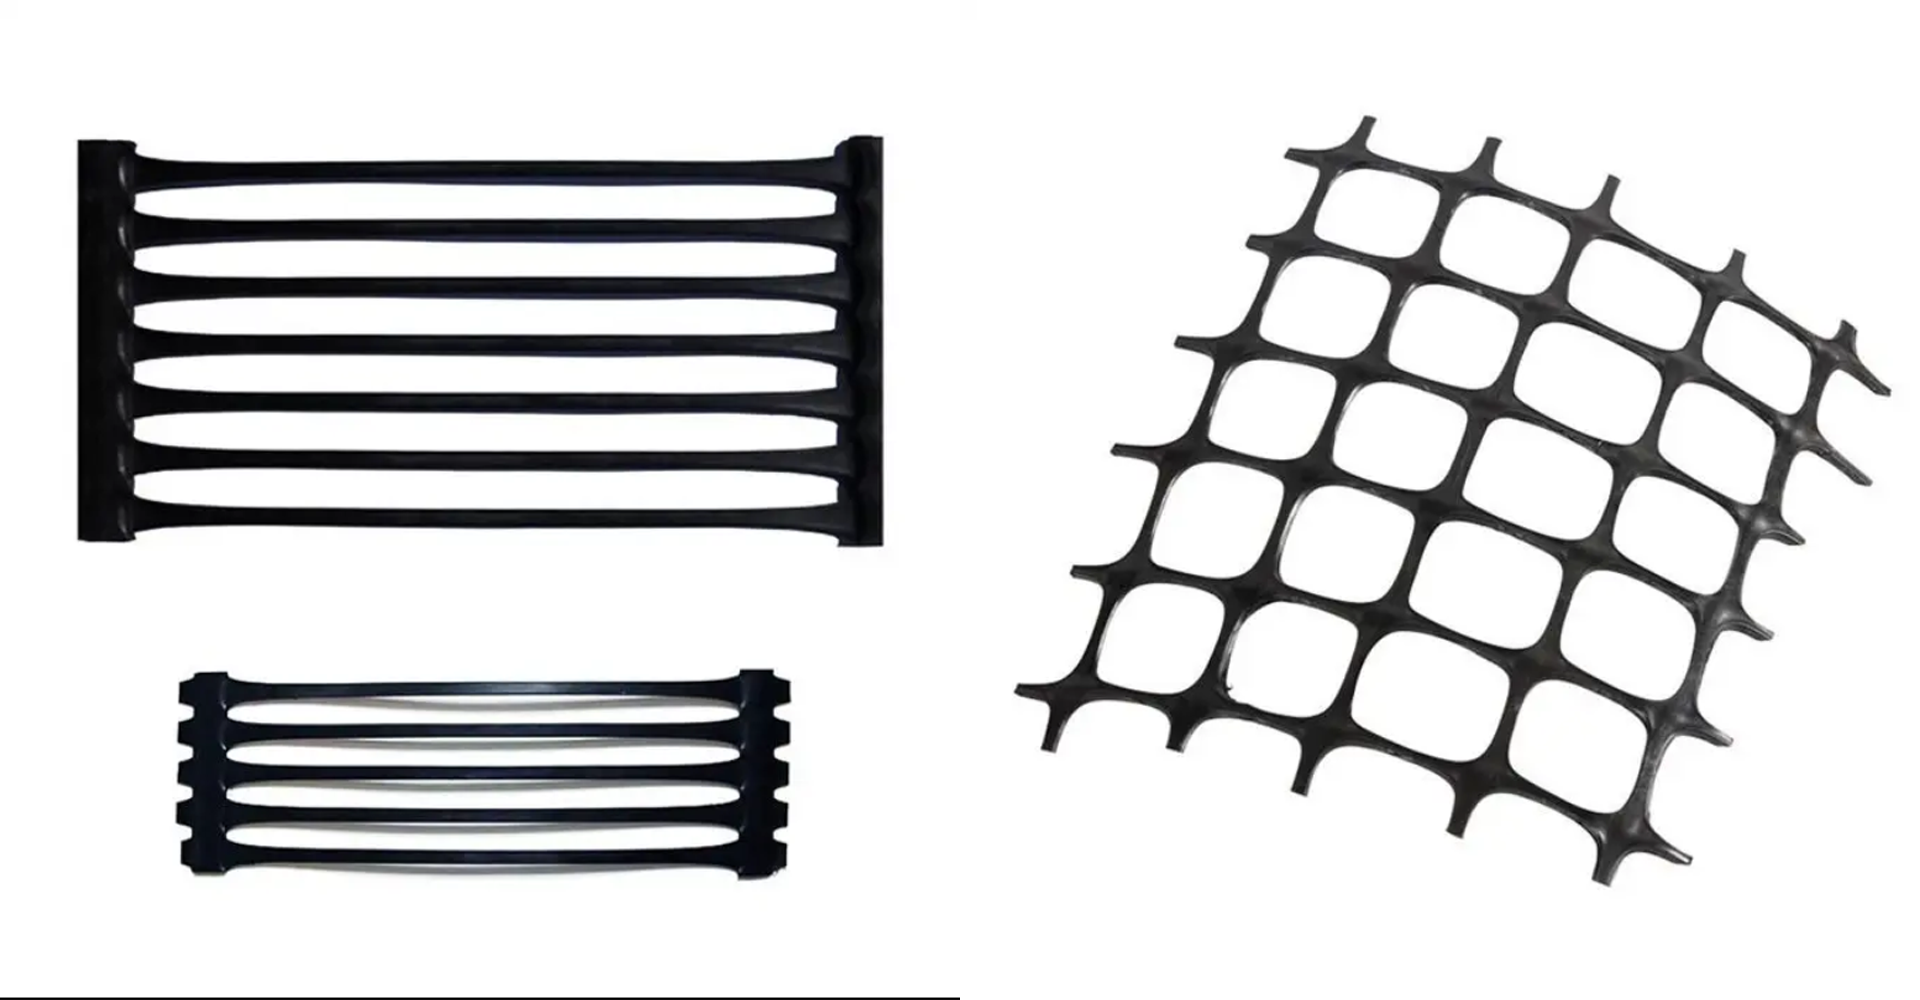 What is the difference between biaxial and uniaxial geogrid?